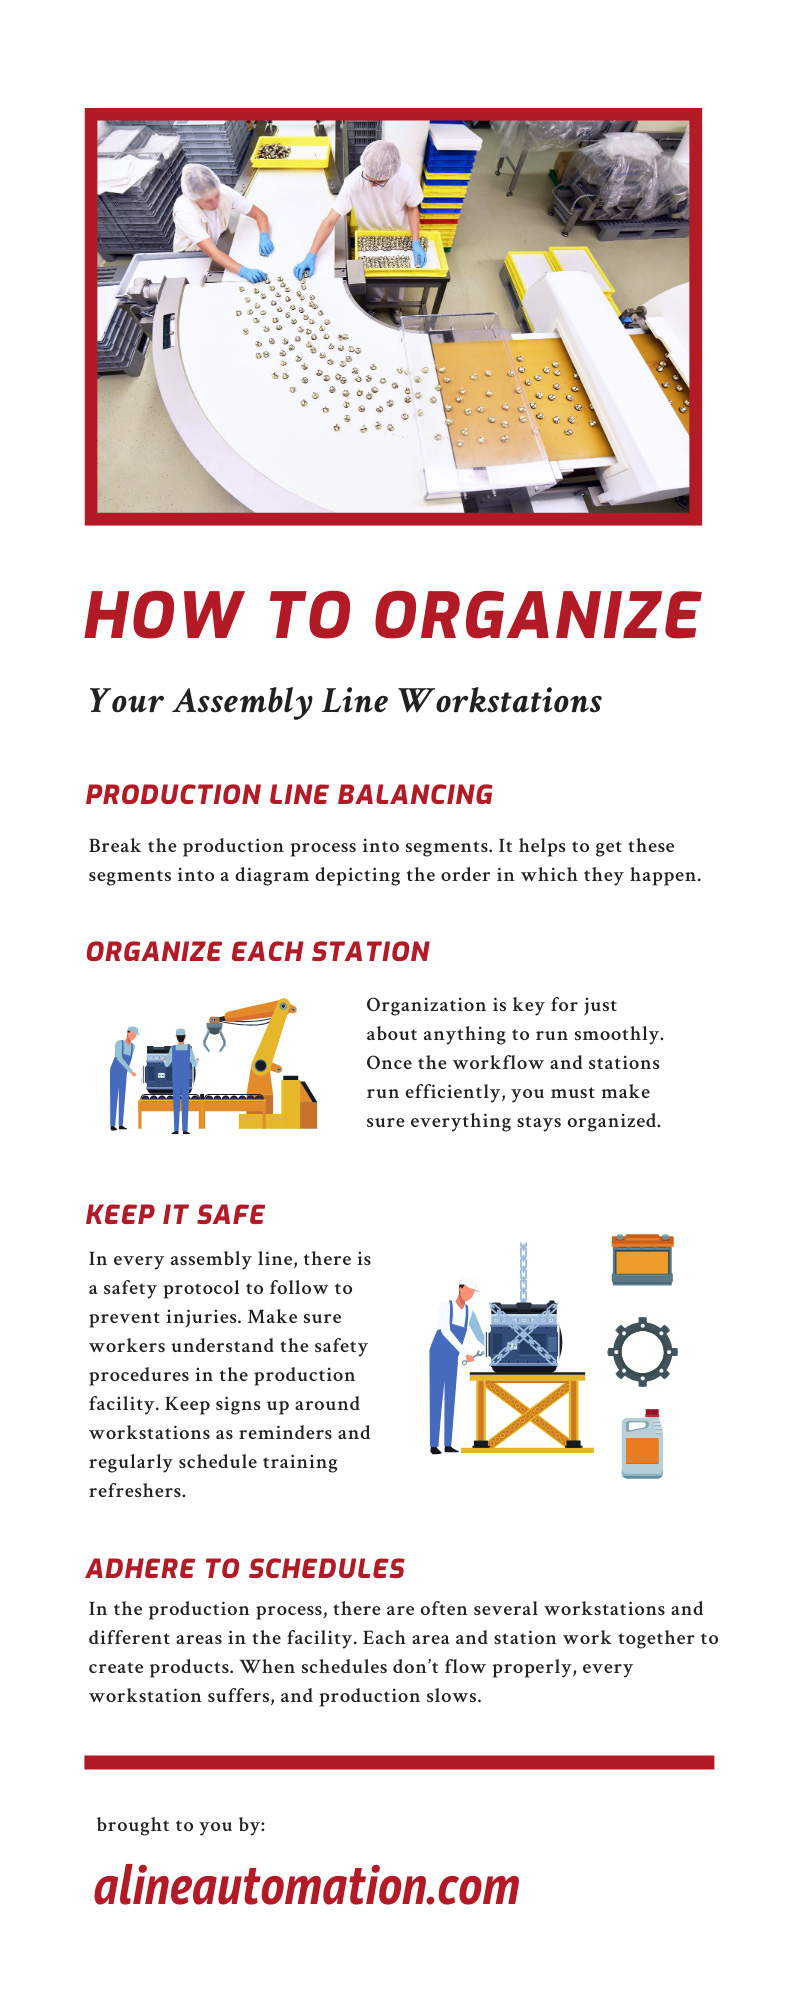 How To Organize Your Assembly Line Workstations infographic